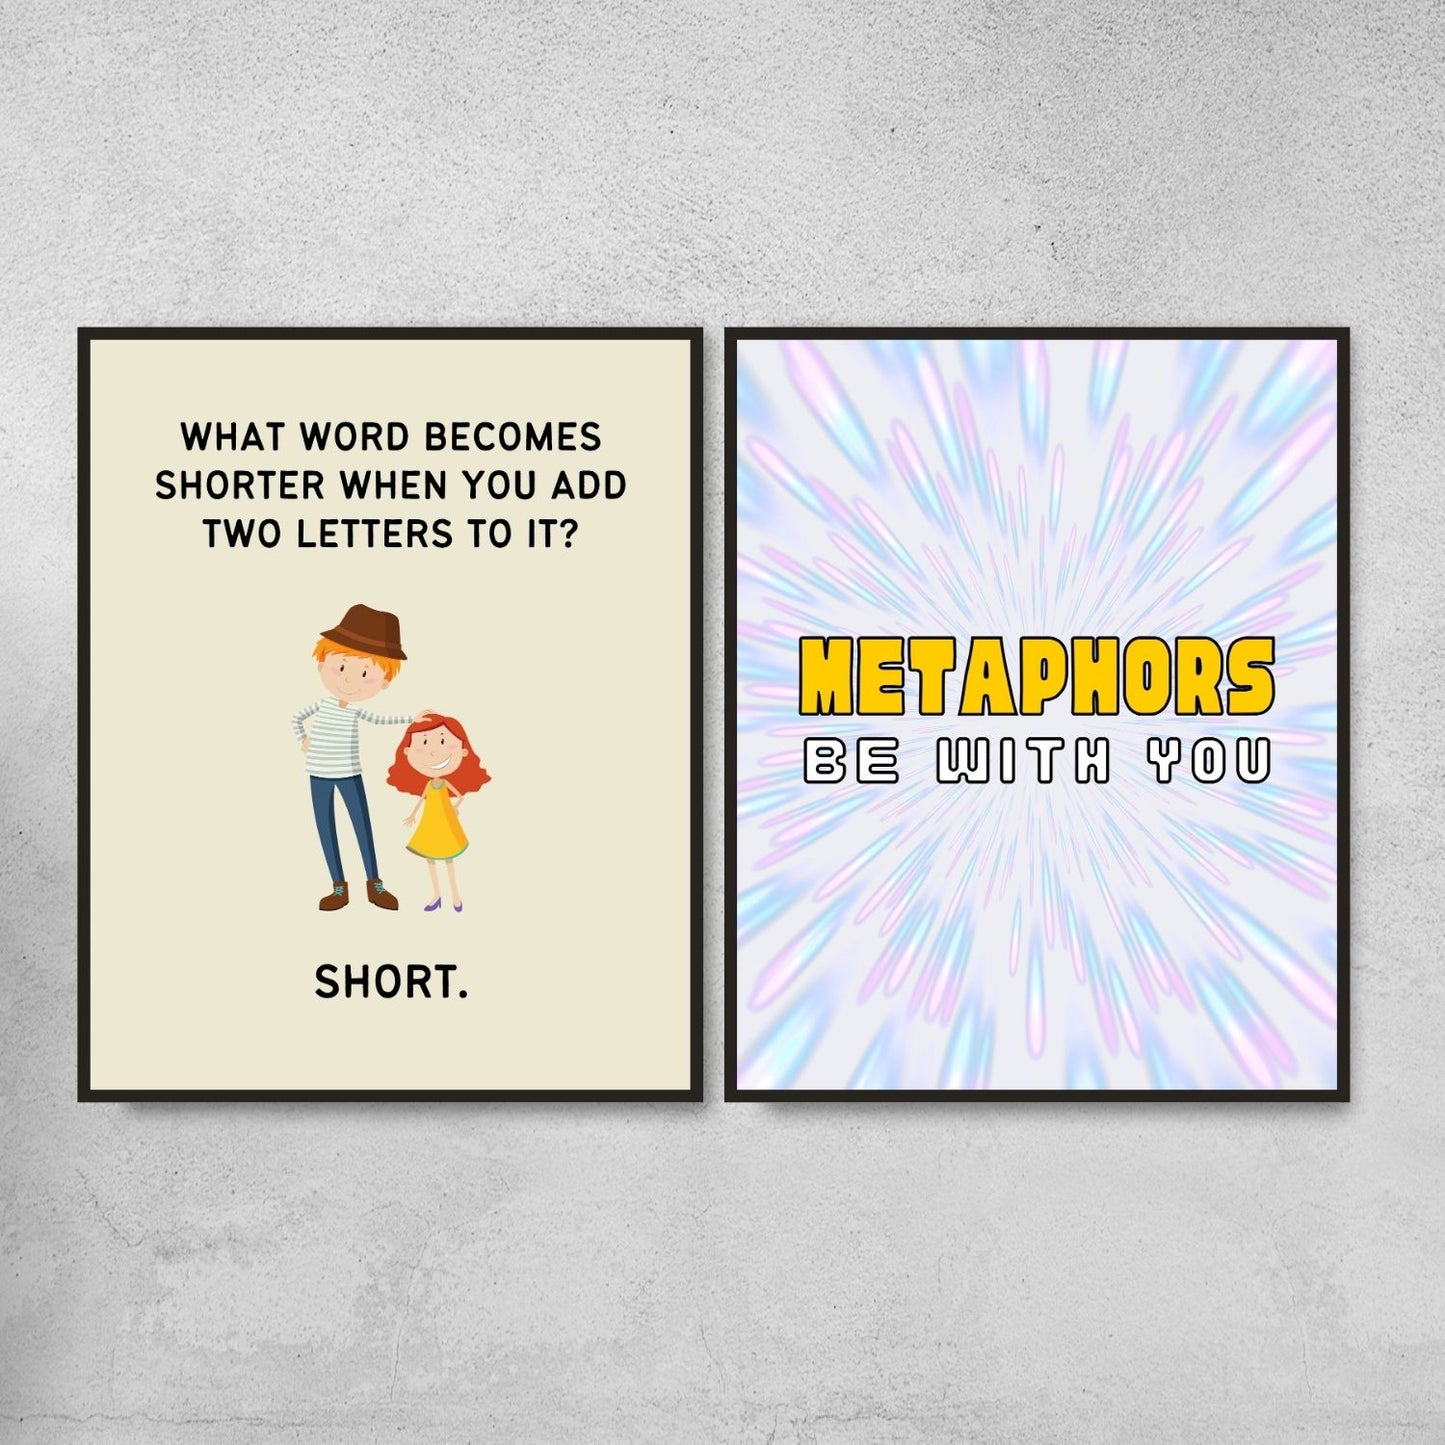 Funny grammar posters for english classroom decoration